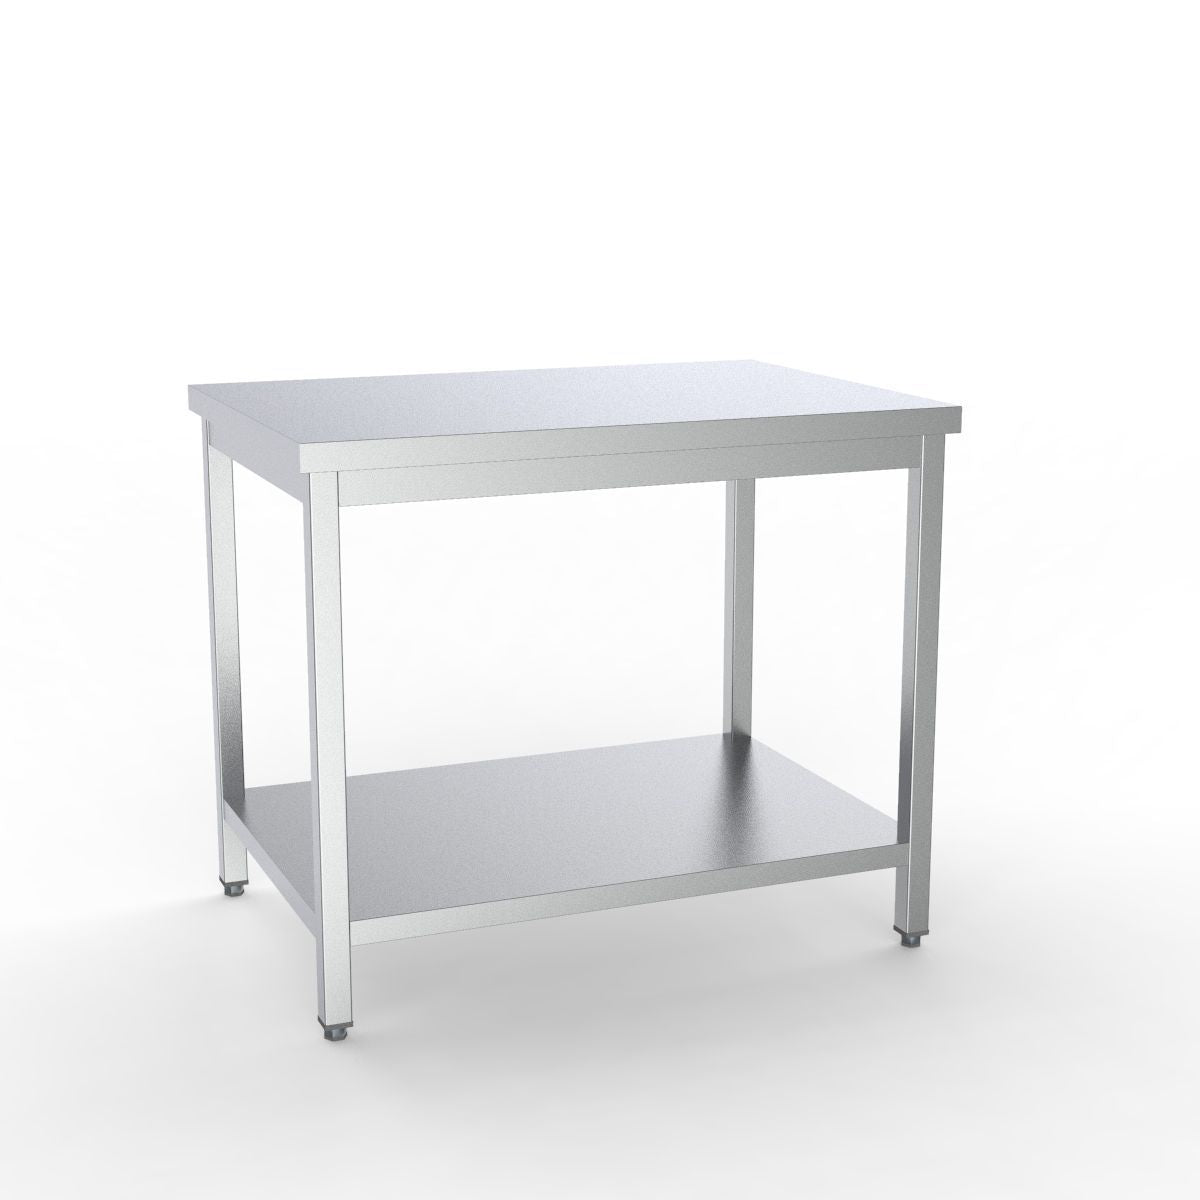 Combisteel Full 430 Stainless Steel 600 Line Worktable With Shelf 1100mm Wide - 7333.0065